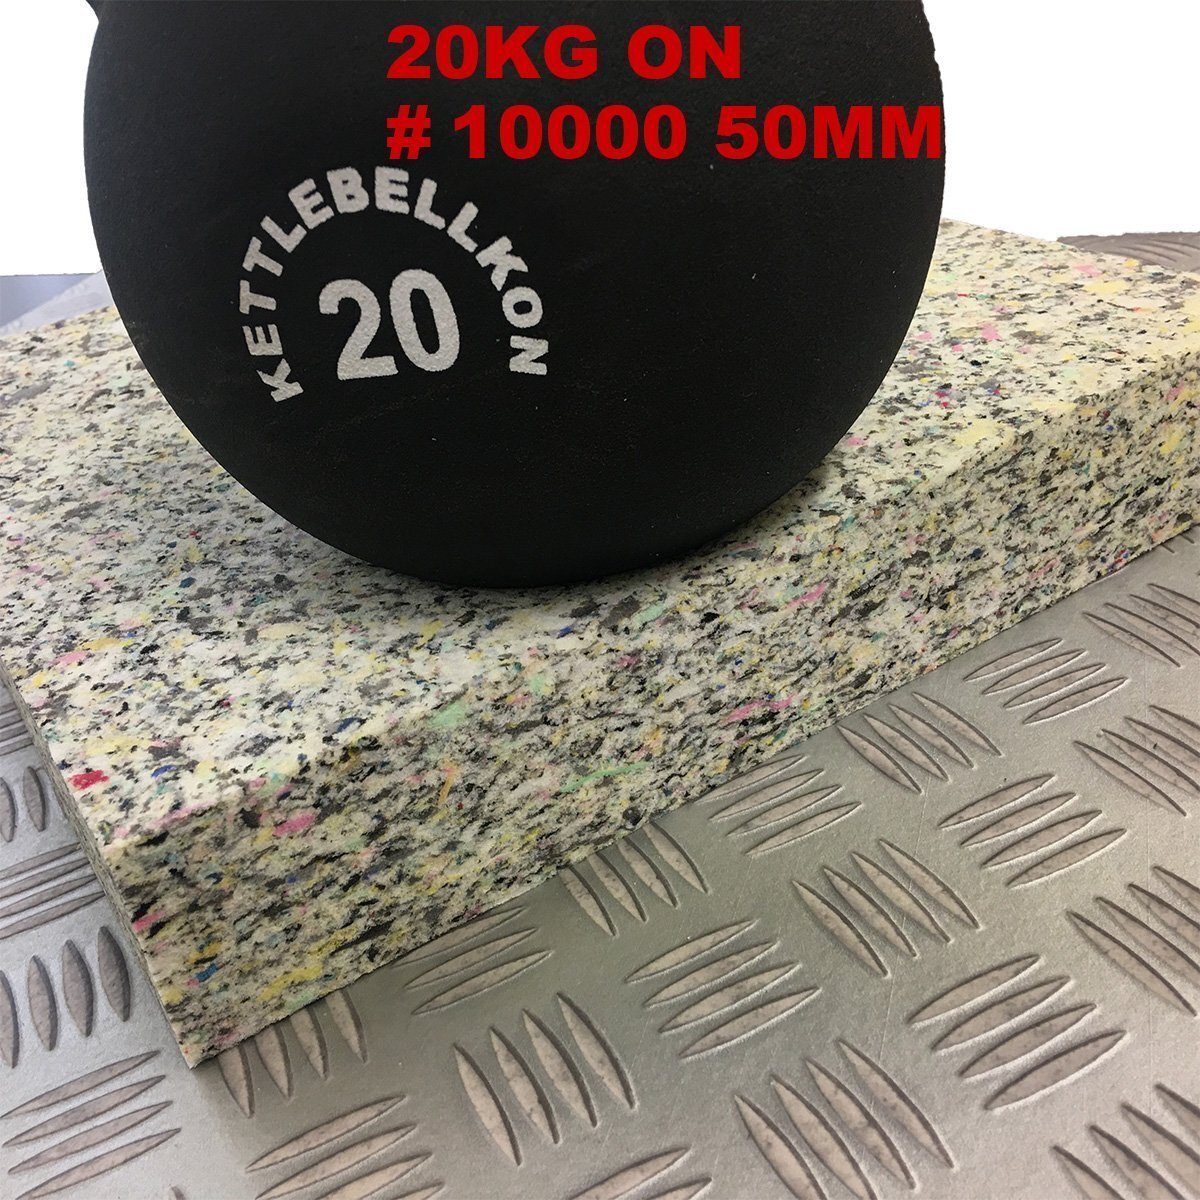  chip urethane [#10000 hardness Special .]1200x2000mm[ thickness 10mm] seat repair / sleeping area in the vehicle for bed / camper / deadning /